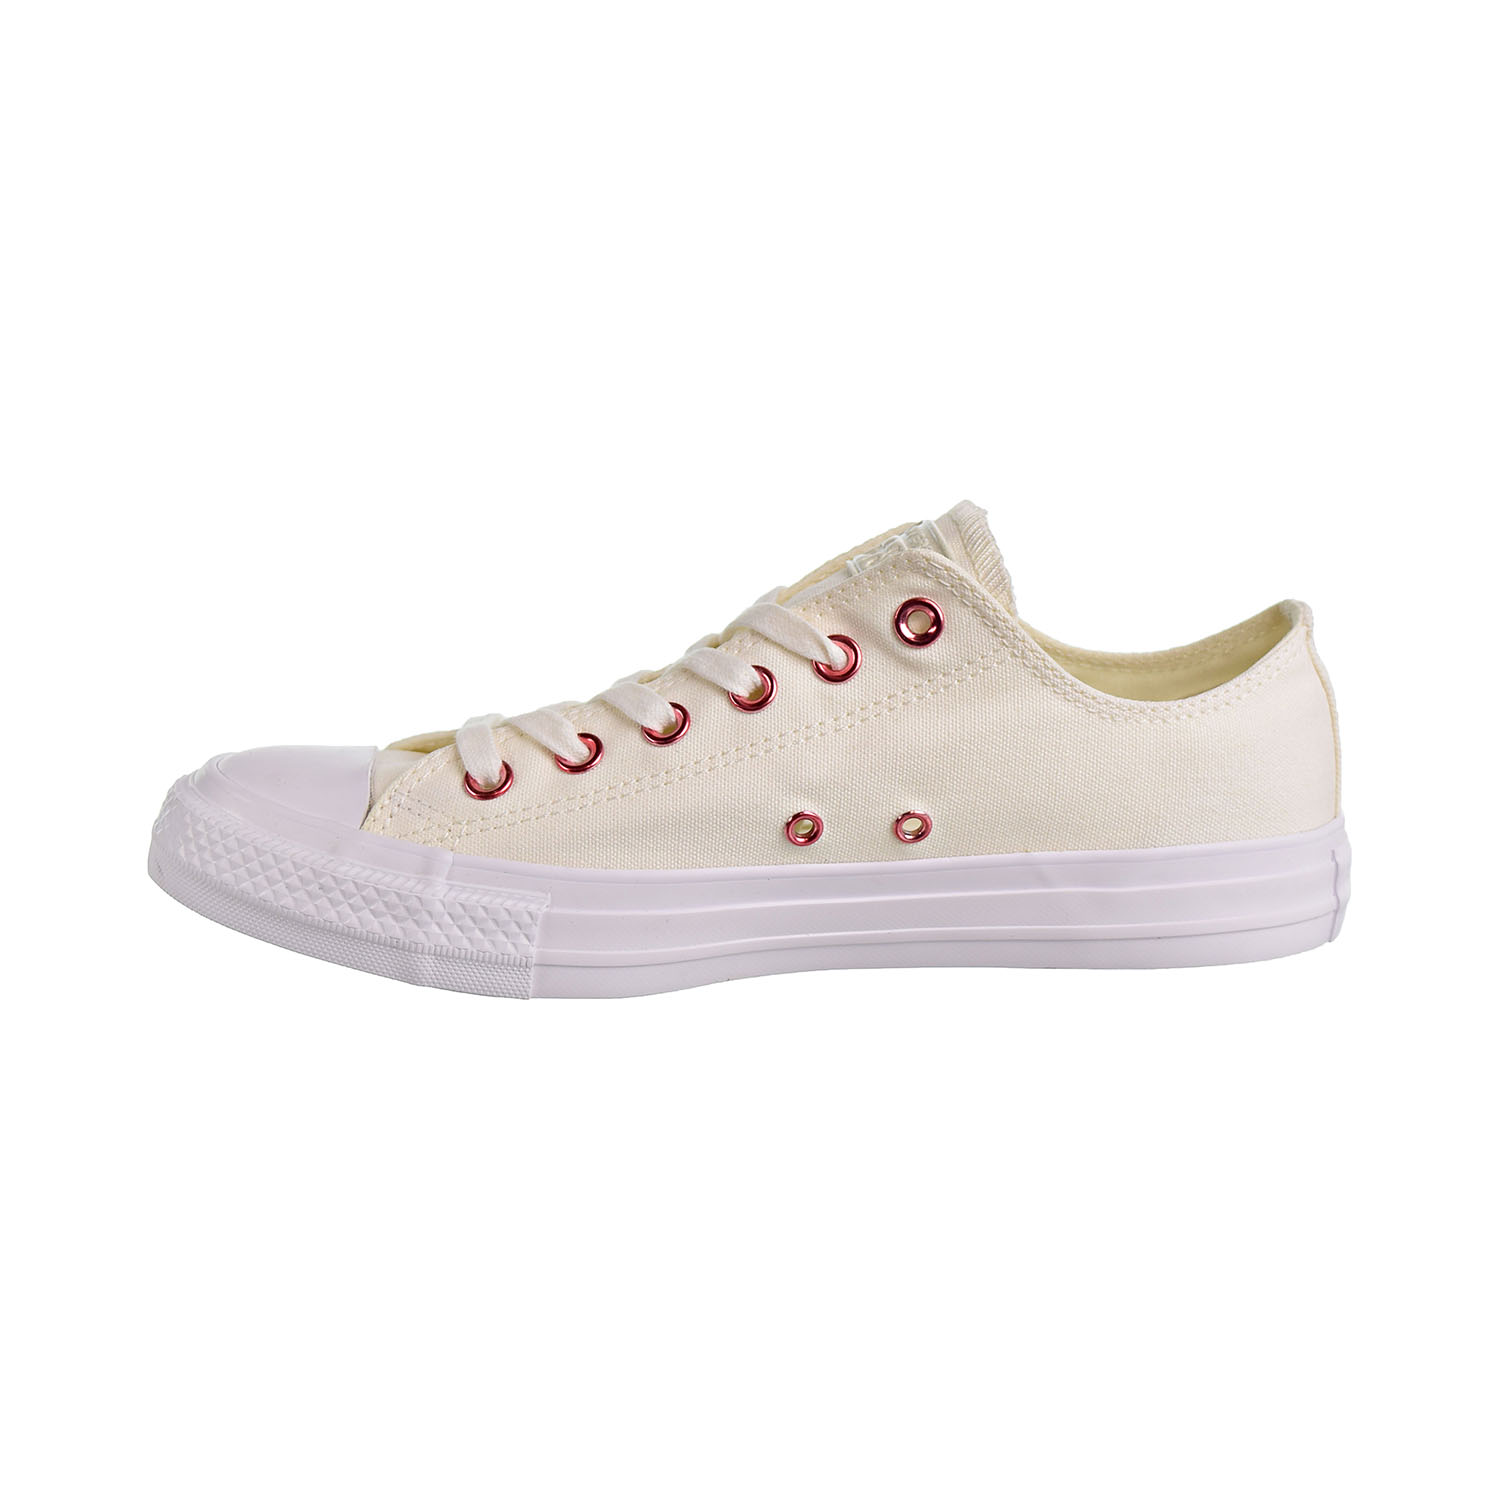 Converse Chuck Taylor All Star Ox Hearts Unisex Shoes Egret-Rhubarb-White 163283c - image 4 of 6